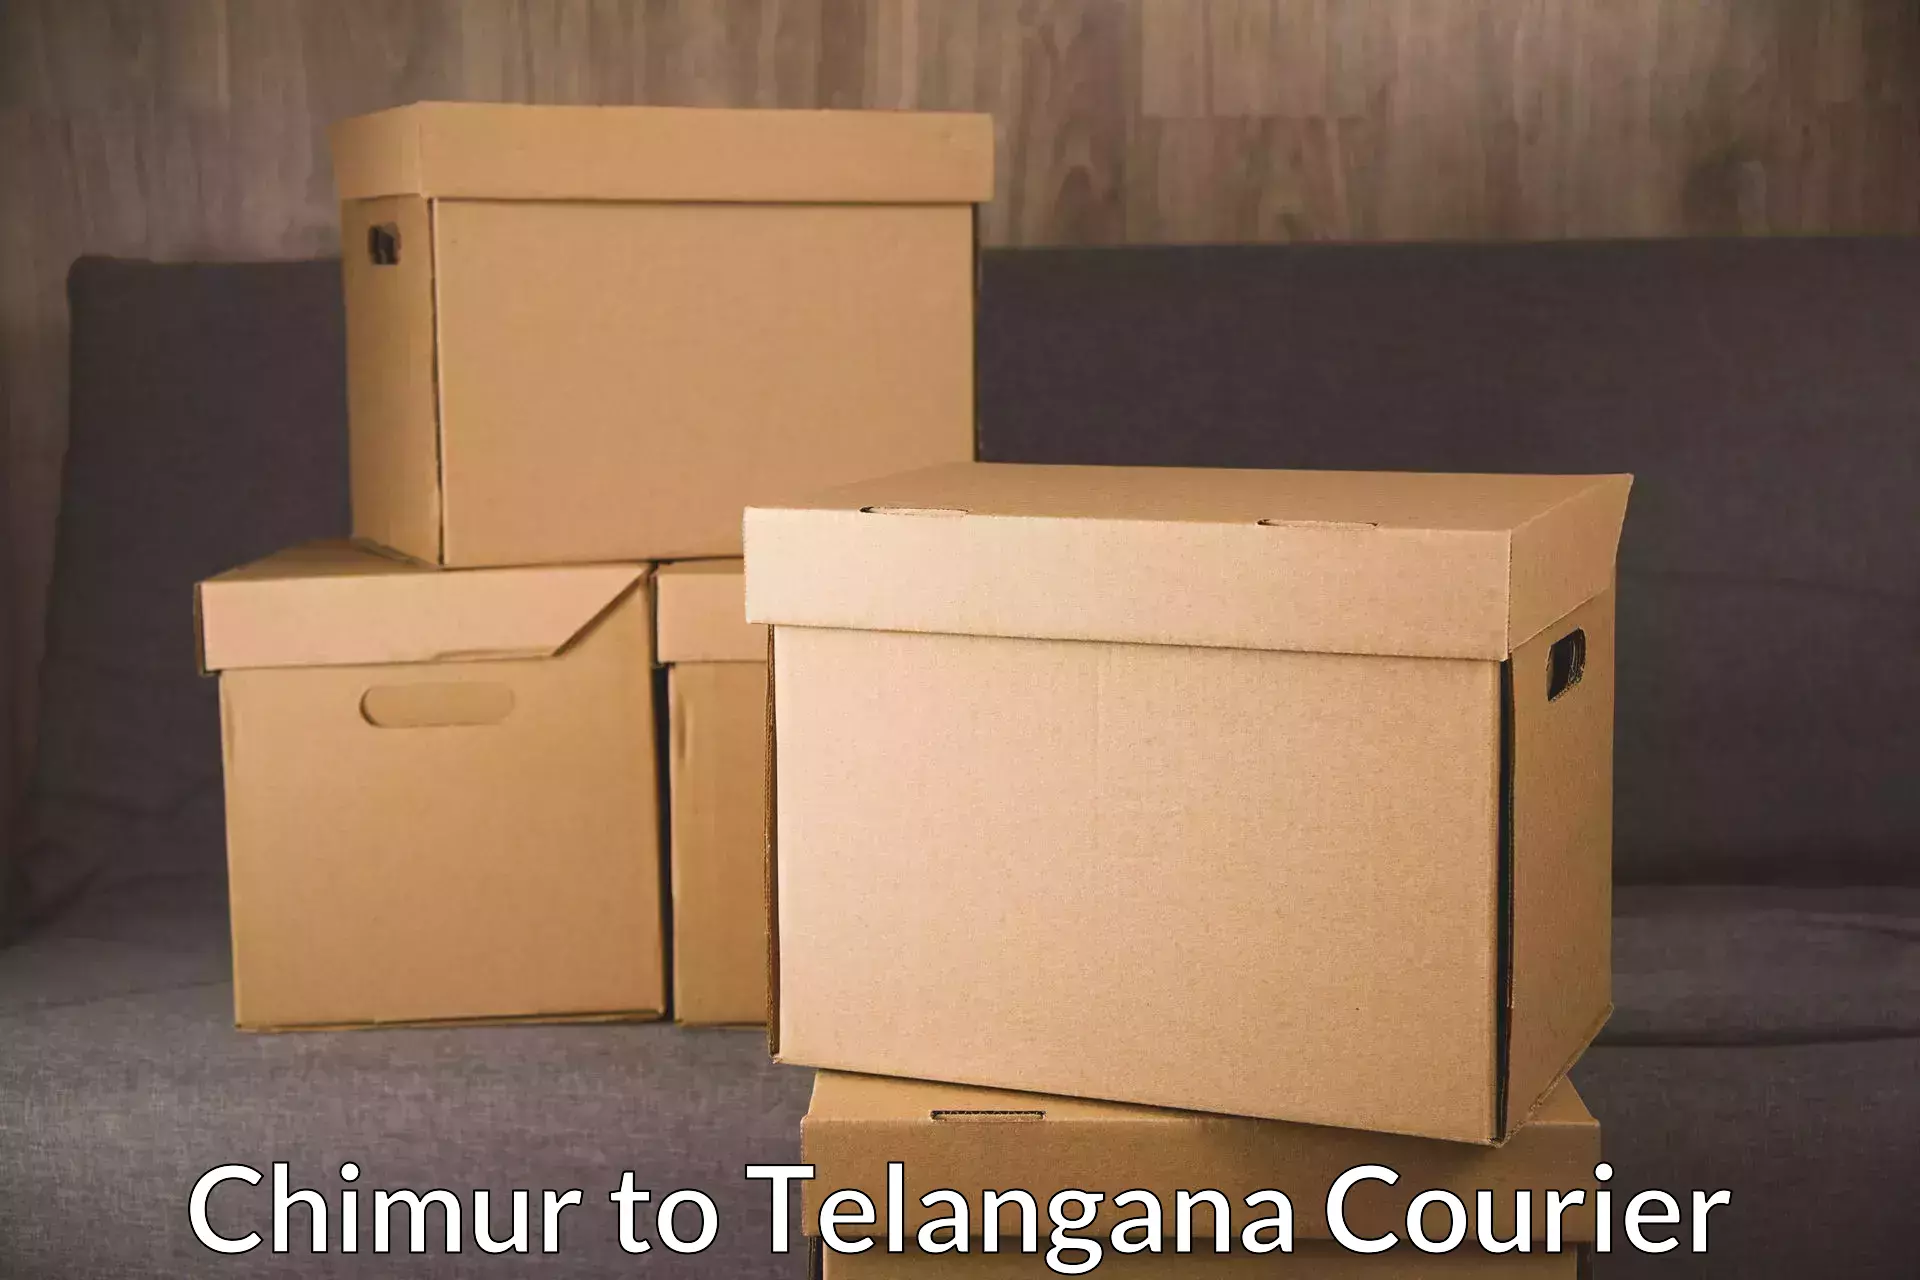 Online package tracking Chimur to Bejjanki